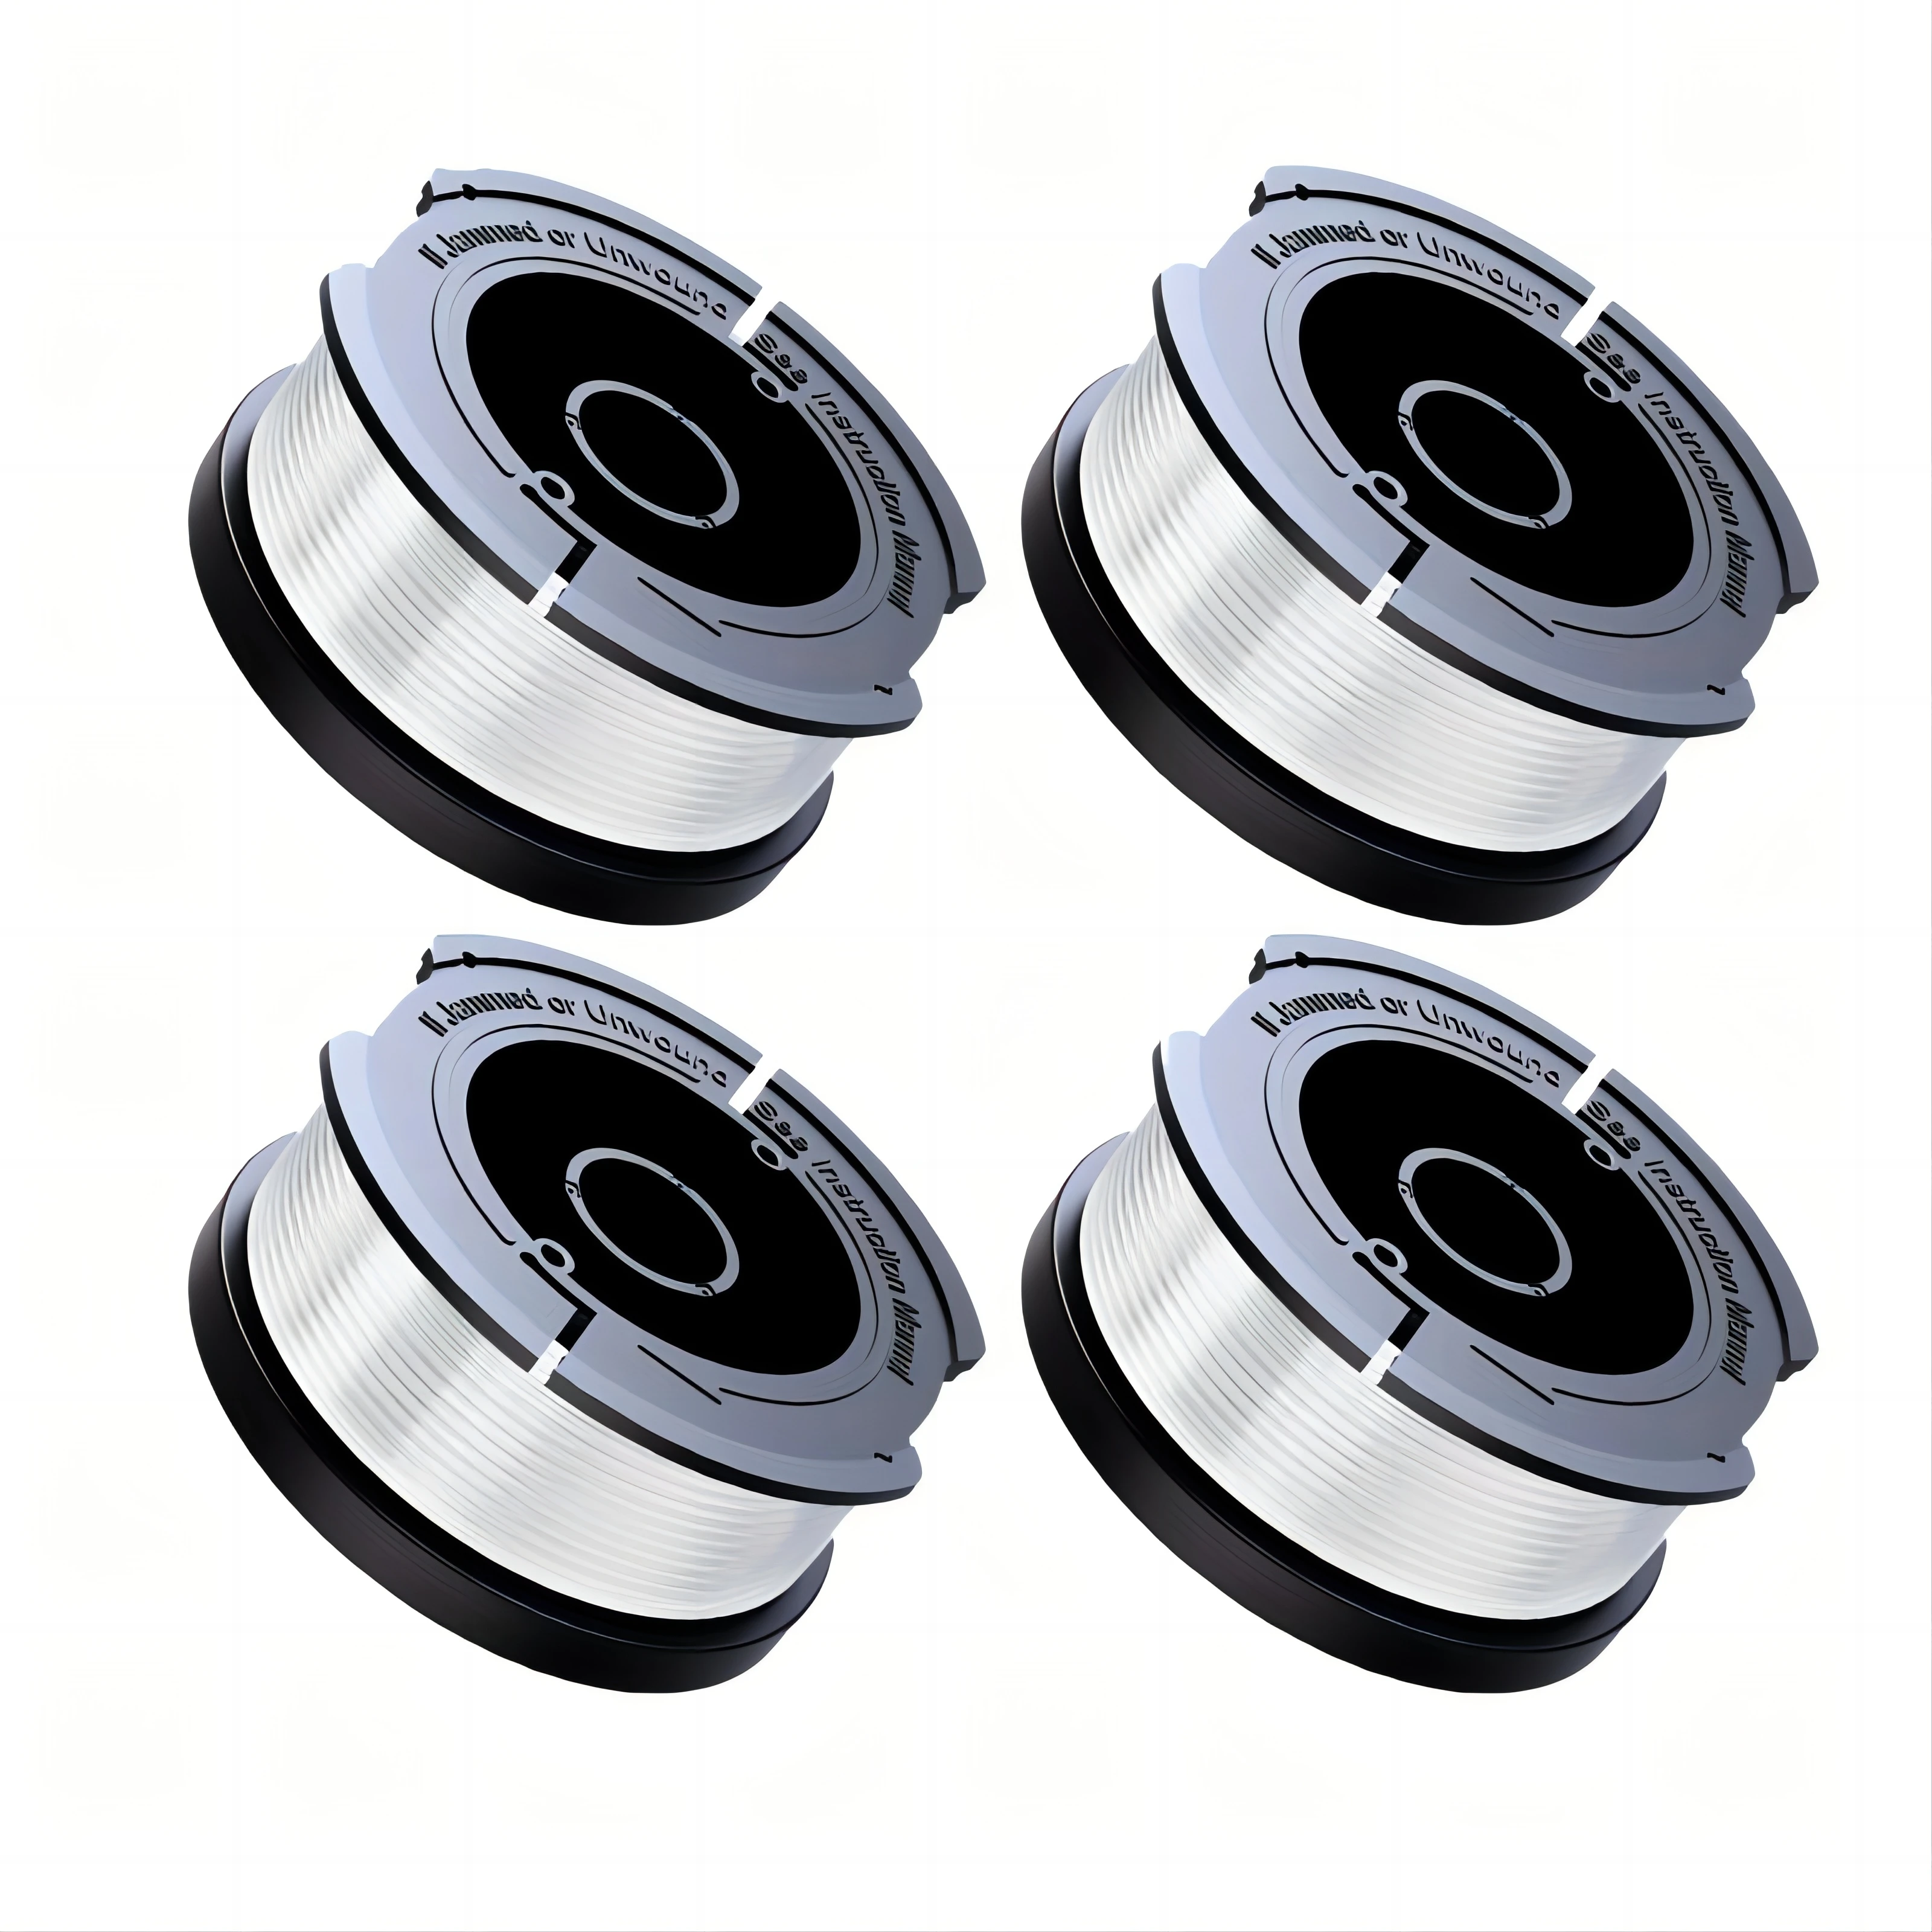 https://ae01.alicdn.com/kf/S0a9b323436b44d29a291e9a00affcc49g/4-Pack-String-Trimmer-Replacement-Spool-for-Black-and-Decker-AF-100-Autofeed-Weed-Eater-Spool.jpg